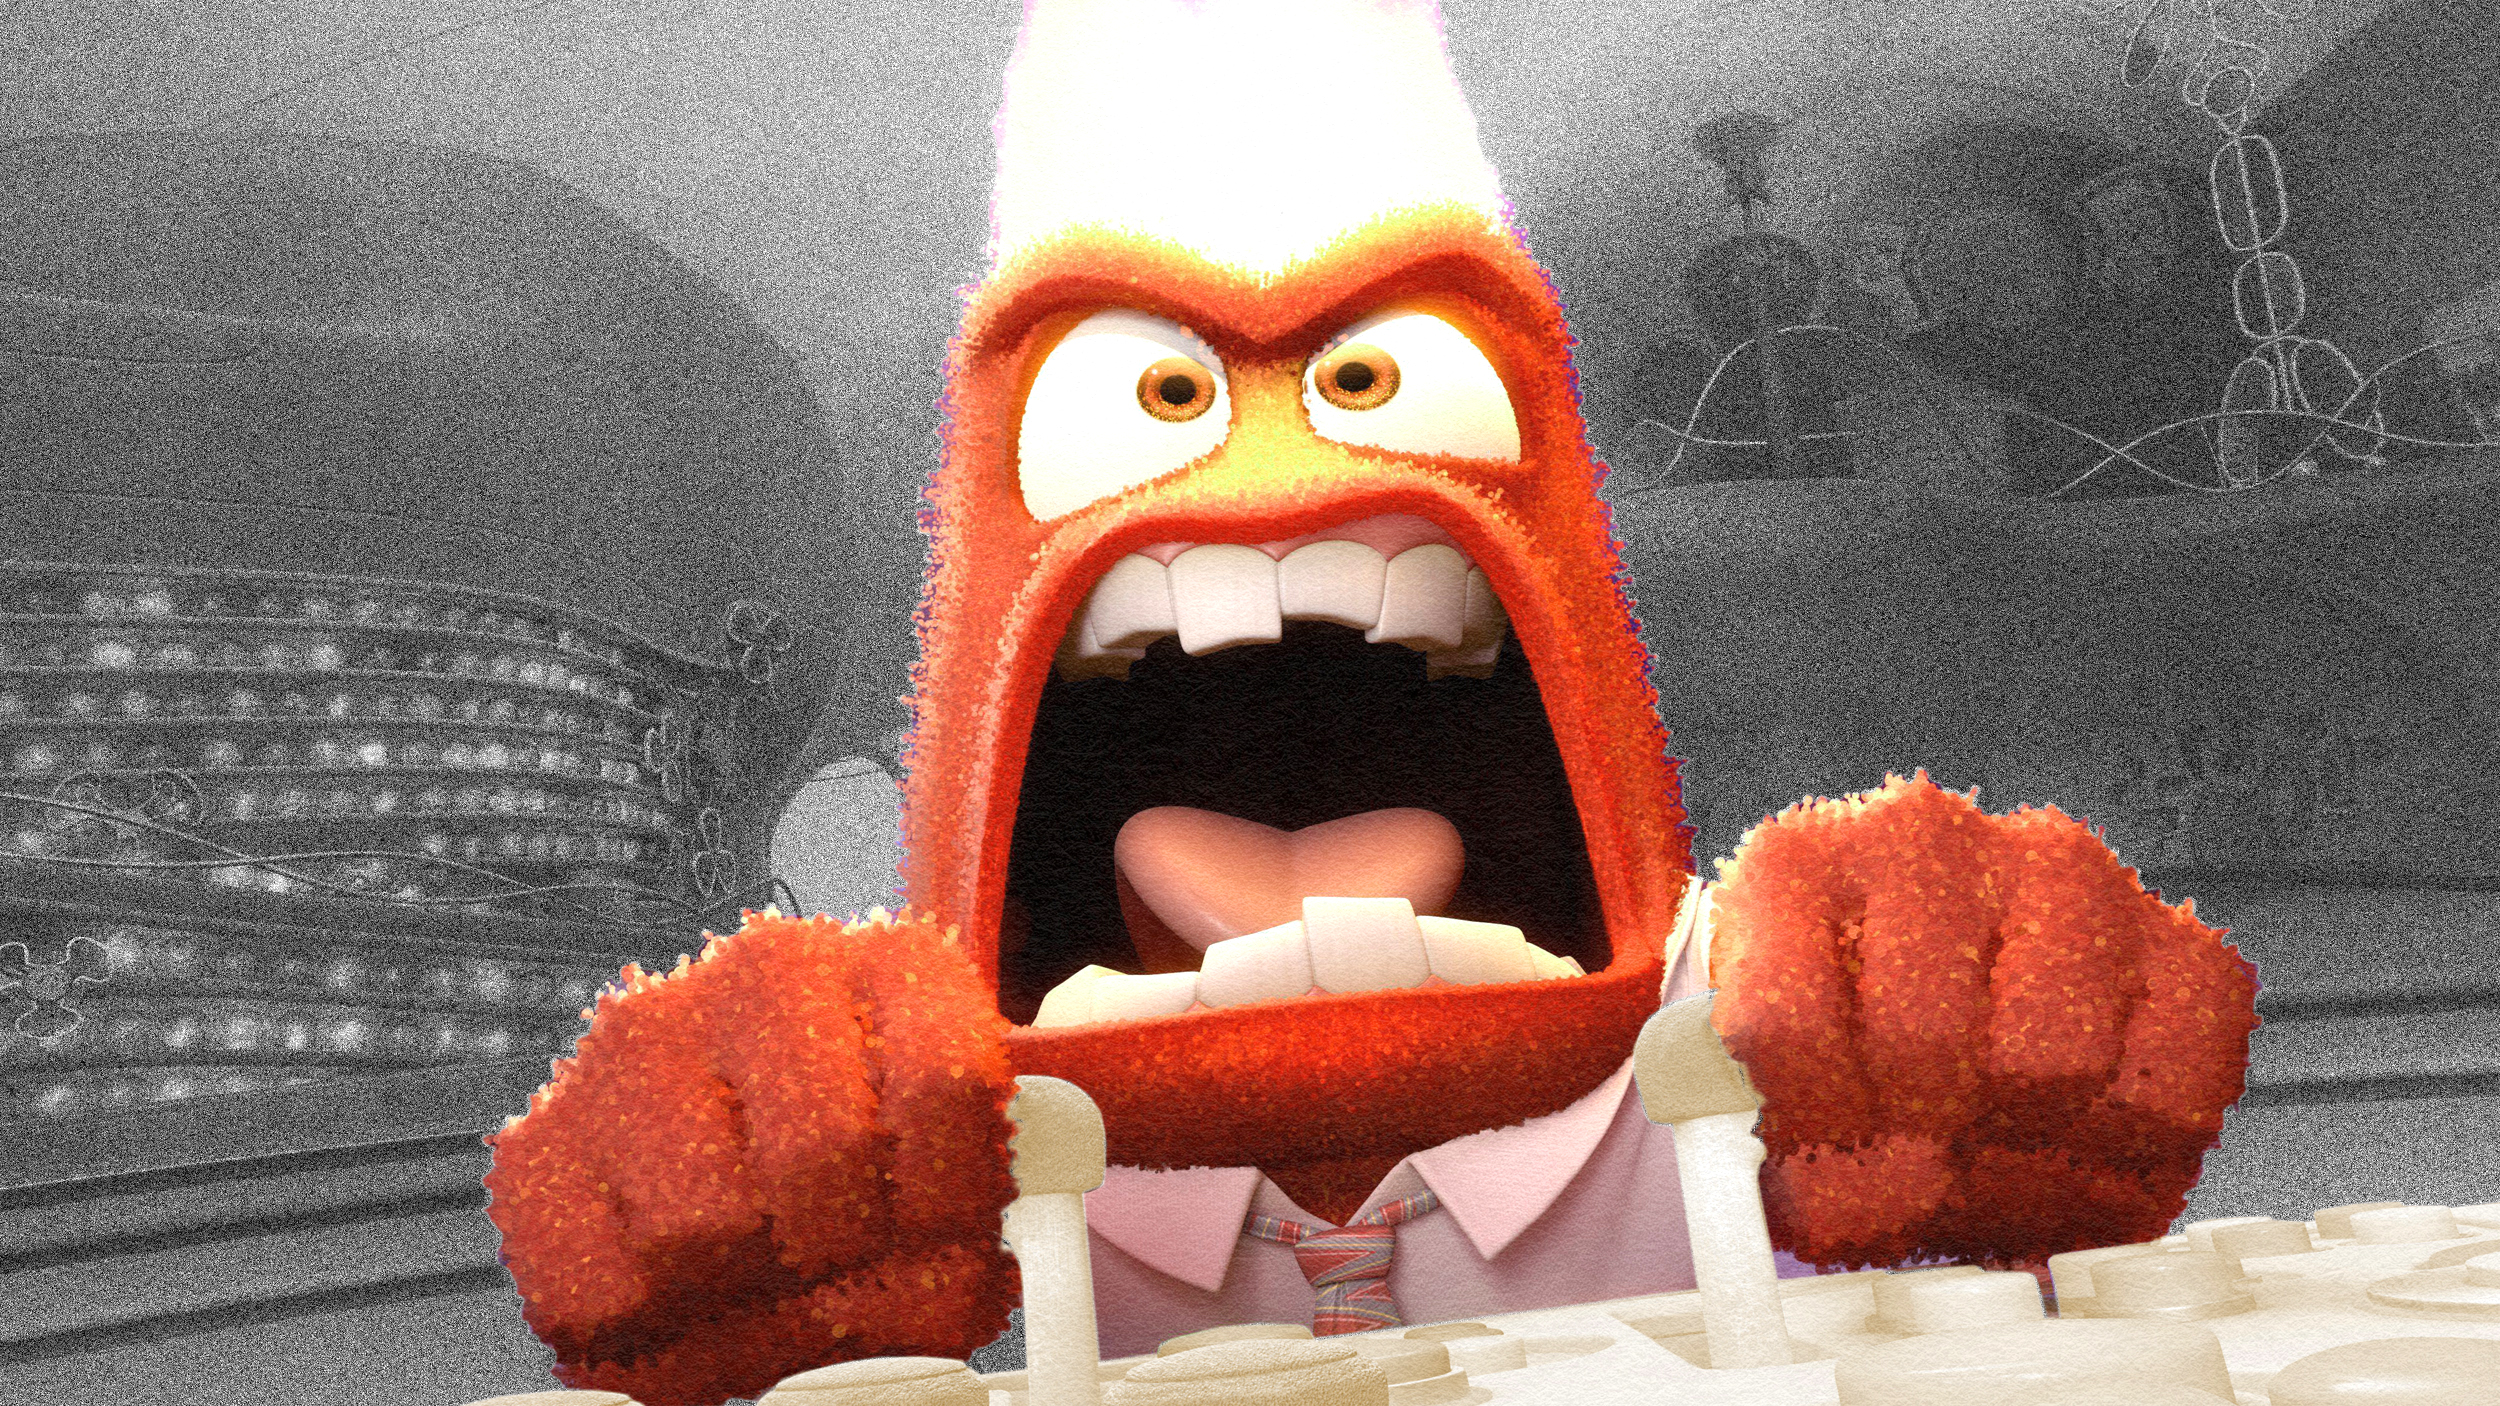 A red, fuzzy cartoon character with a flame-like head is depicted in an overly emotional state, gripping control levers in a control room setting.